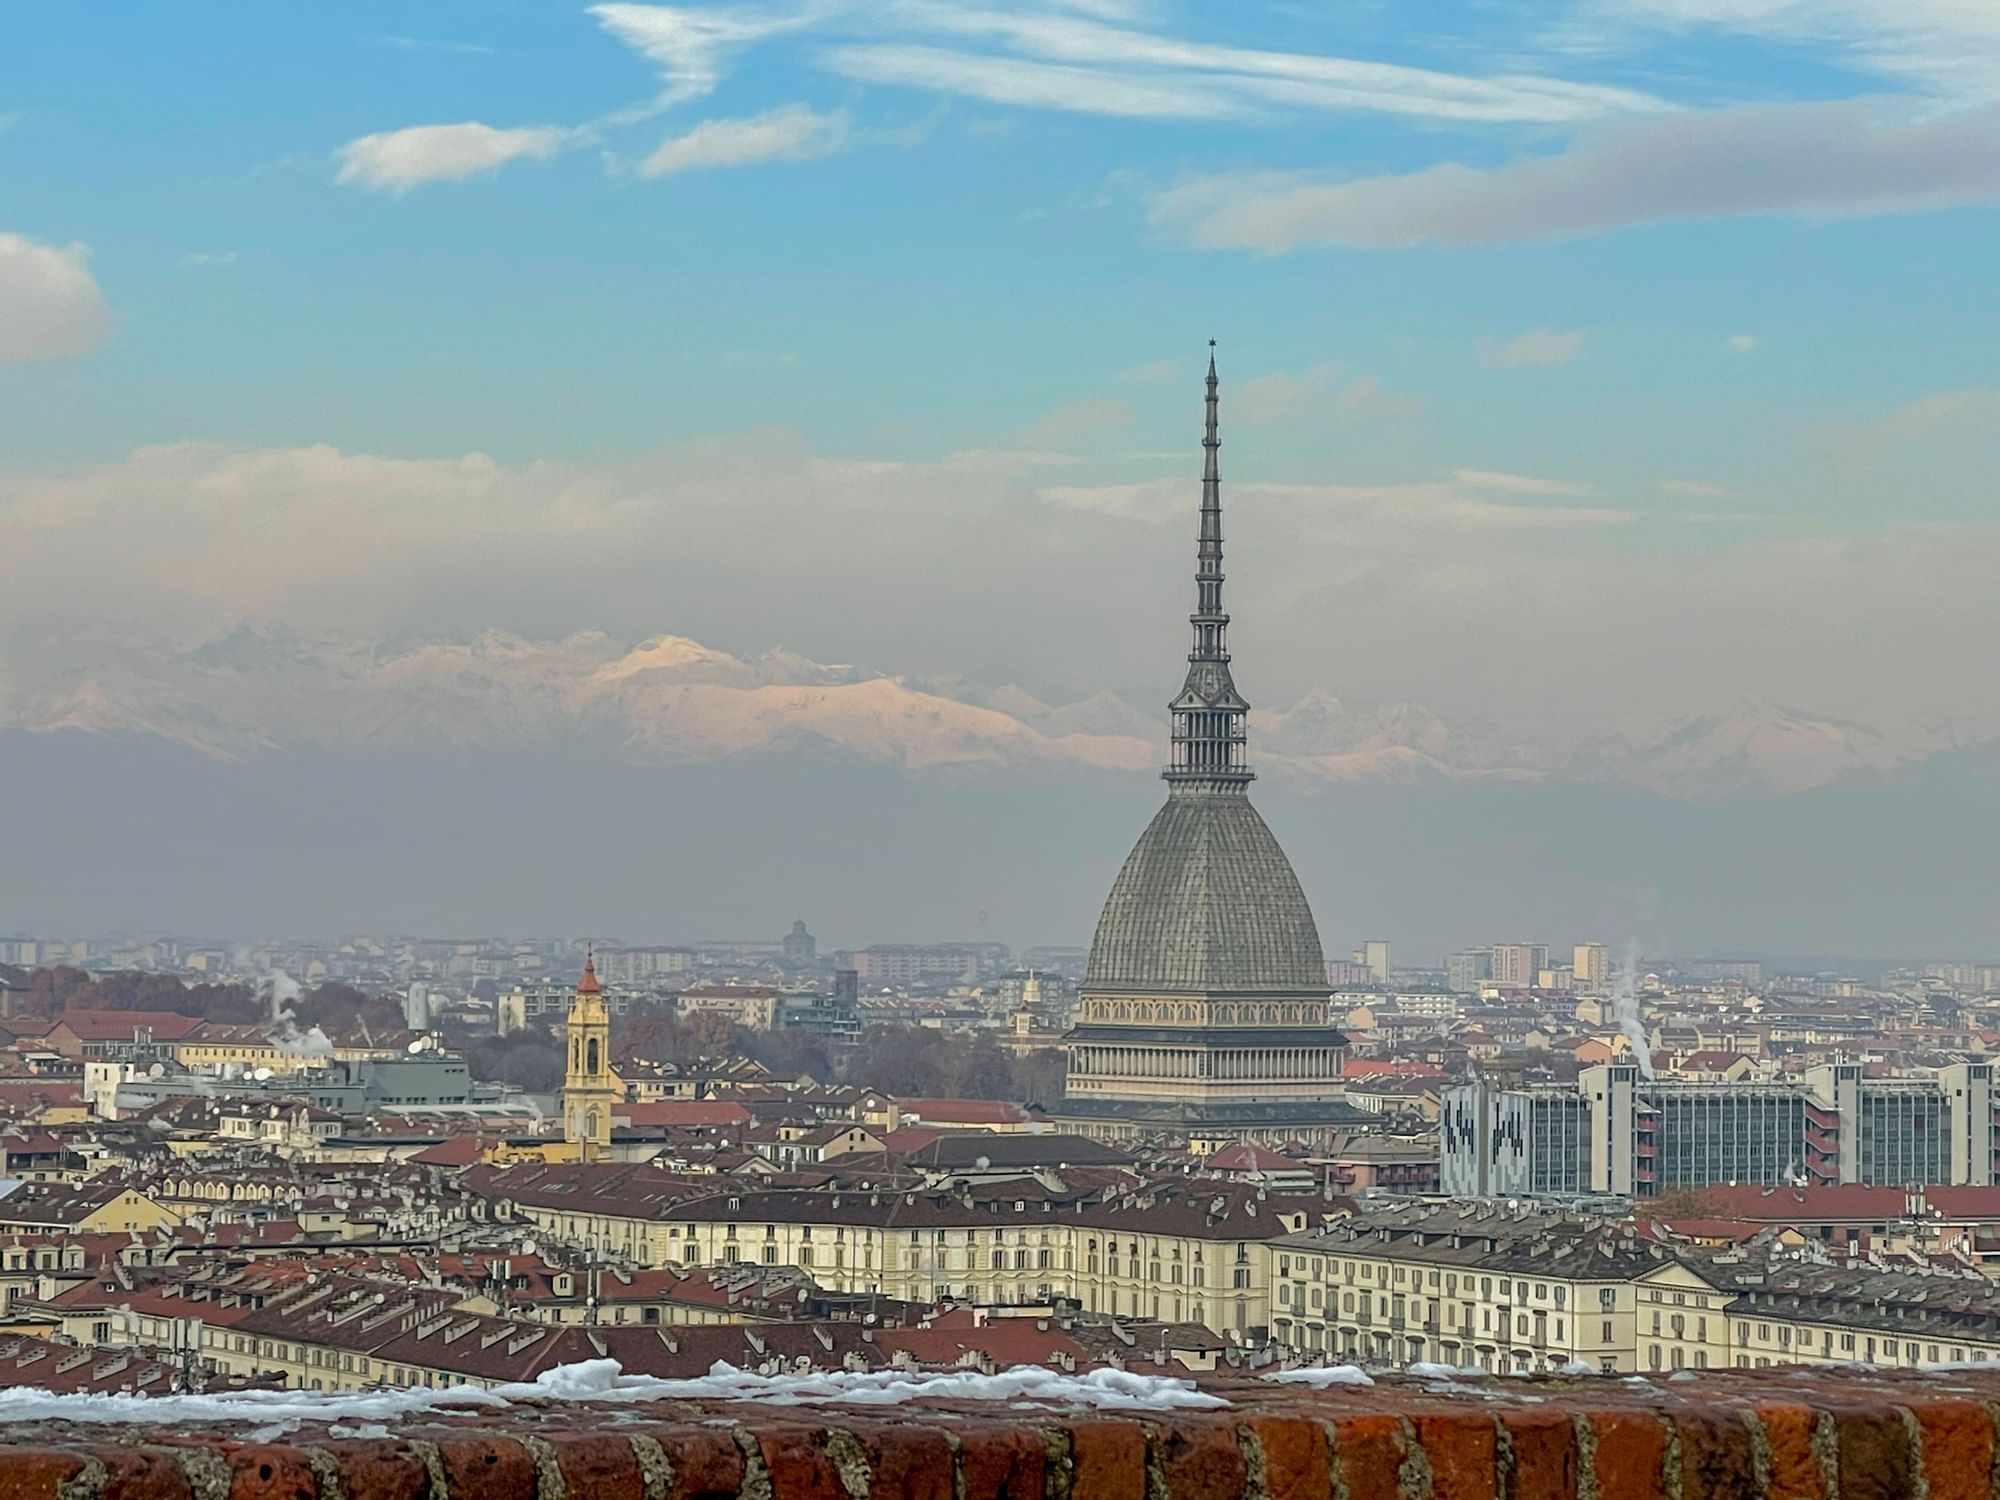 Turin’s must-see attractions and special gems: biew from Monte dei Cappuccini